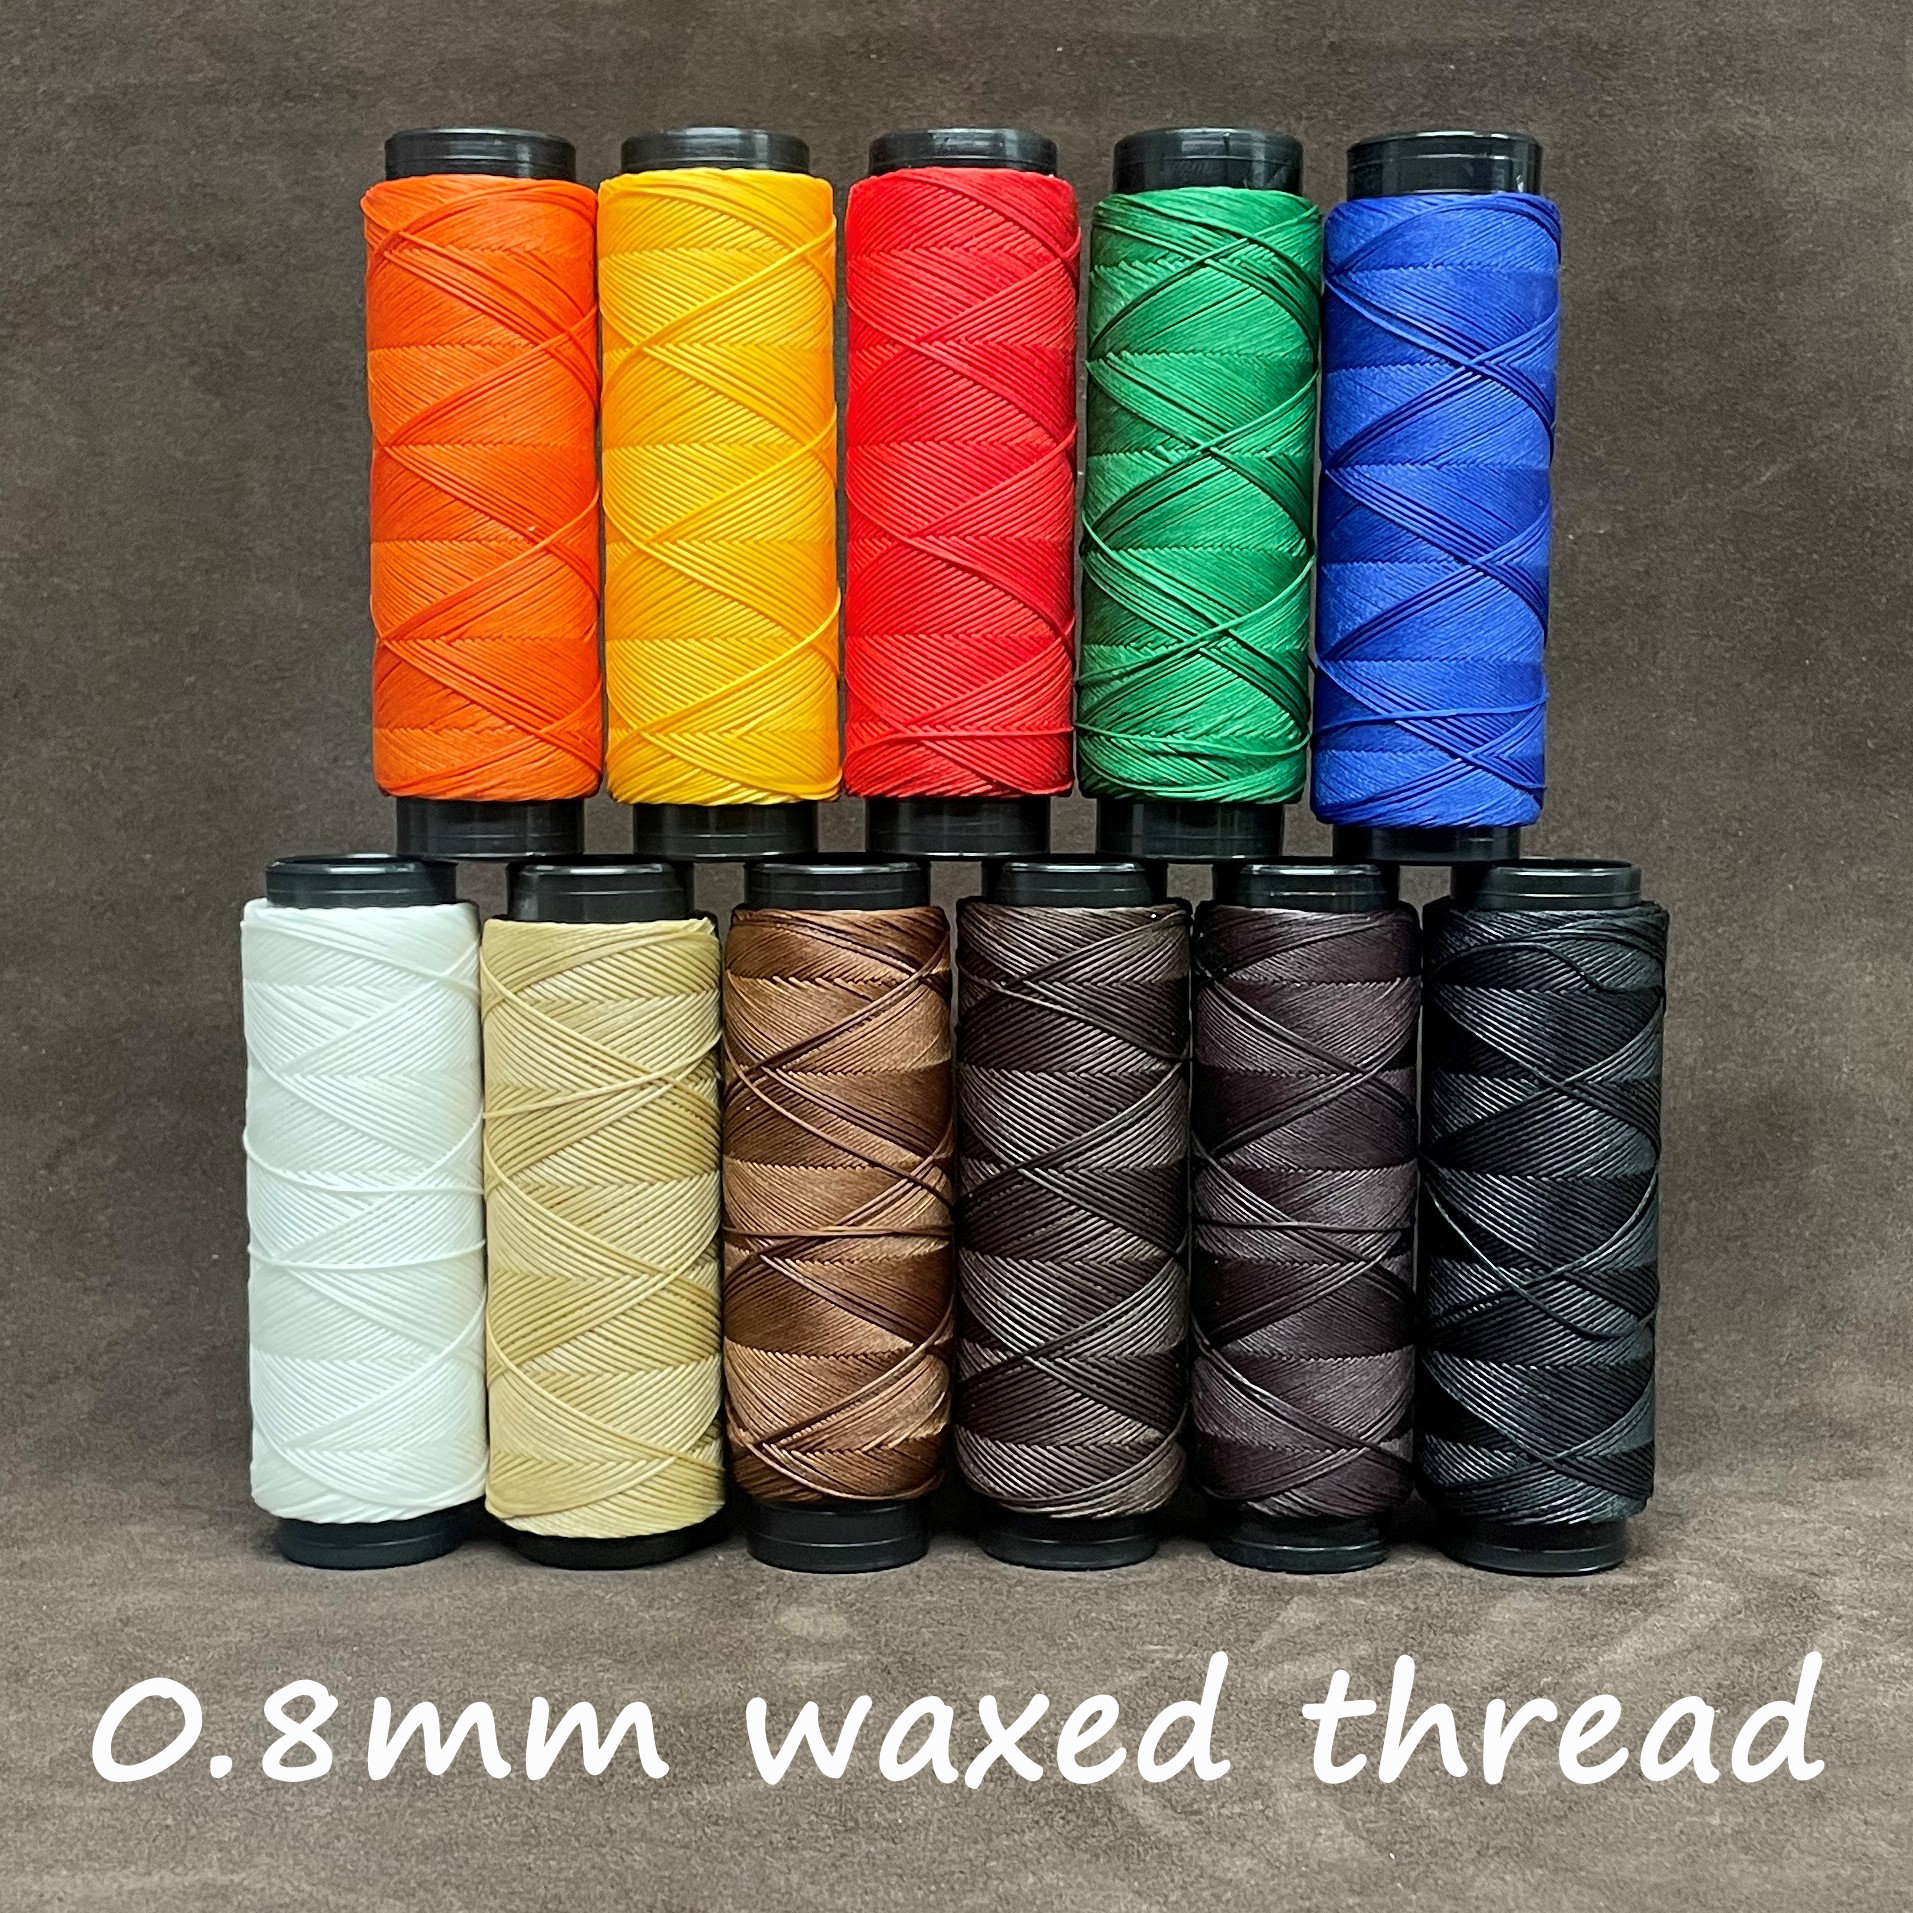 Ritza 25 Tiger Thread, Waxed Polyester Color & Size Card 